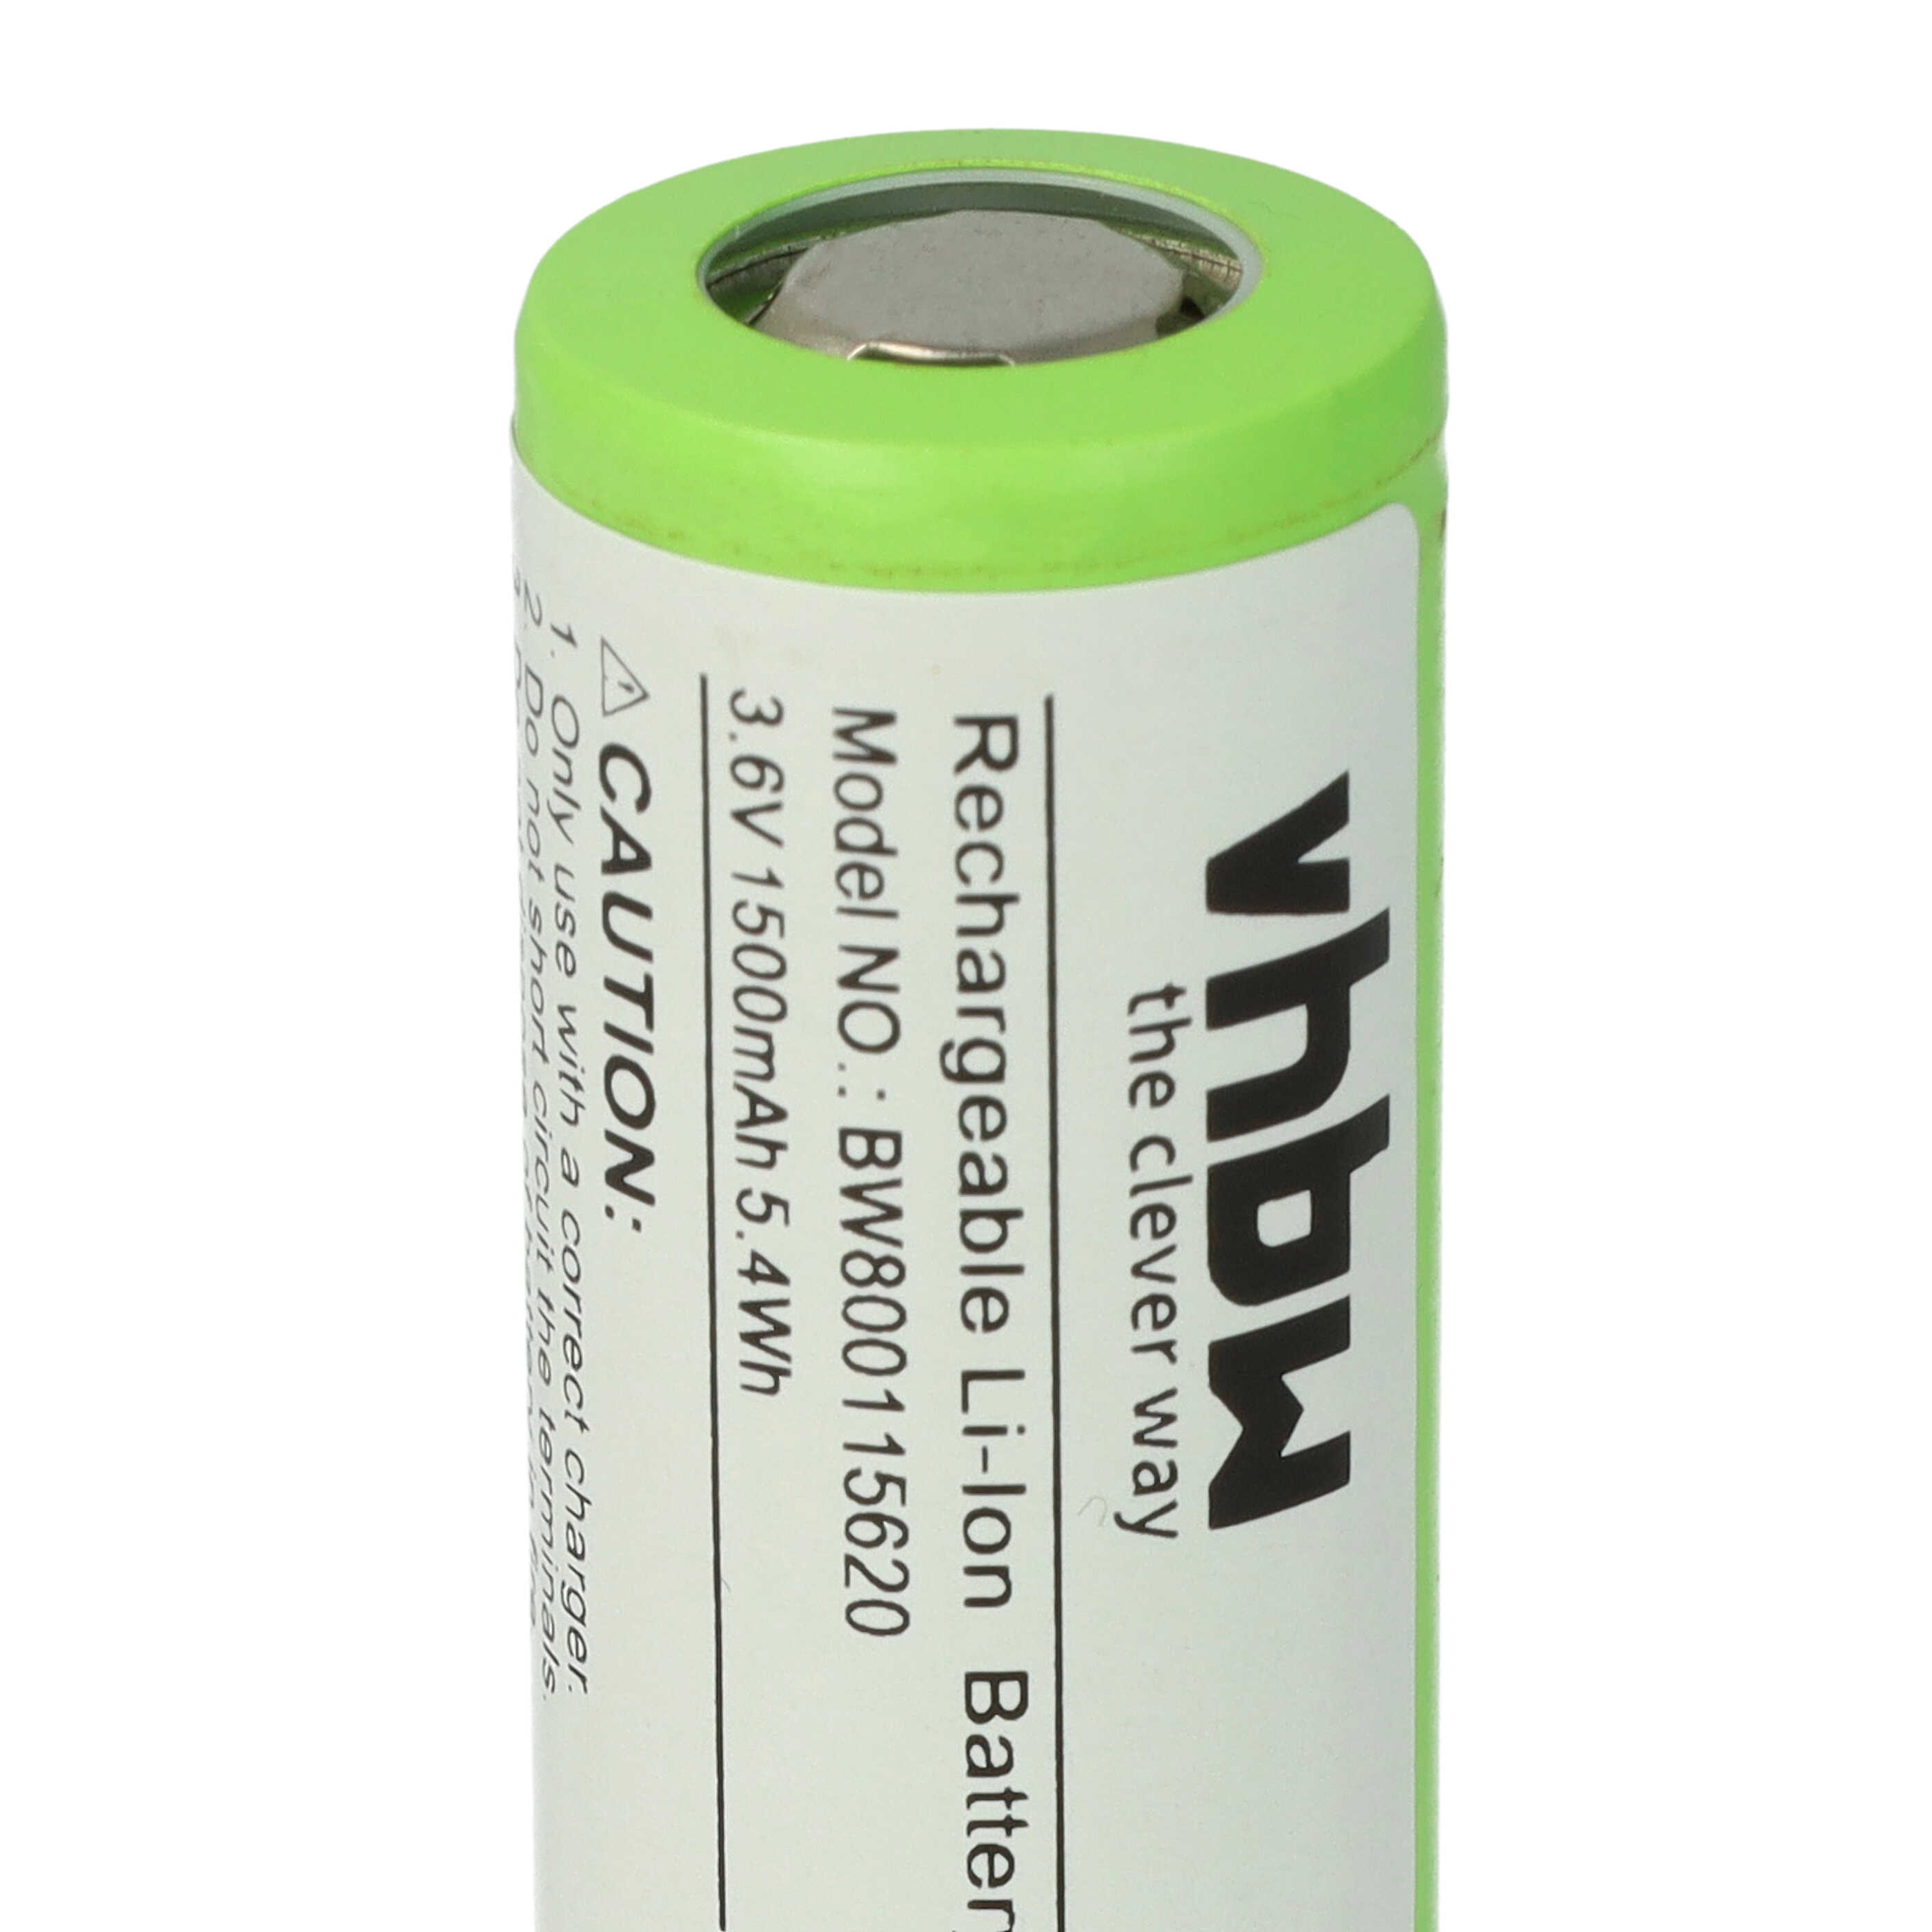 Raw Battery Cell for Rechargeable Batteries - 1500mAh 3.6V LiNiMnCoO2